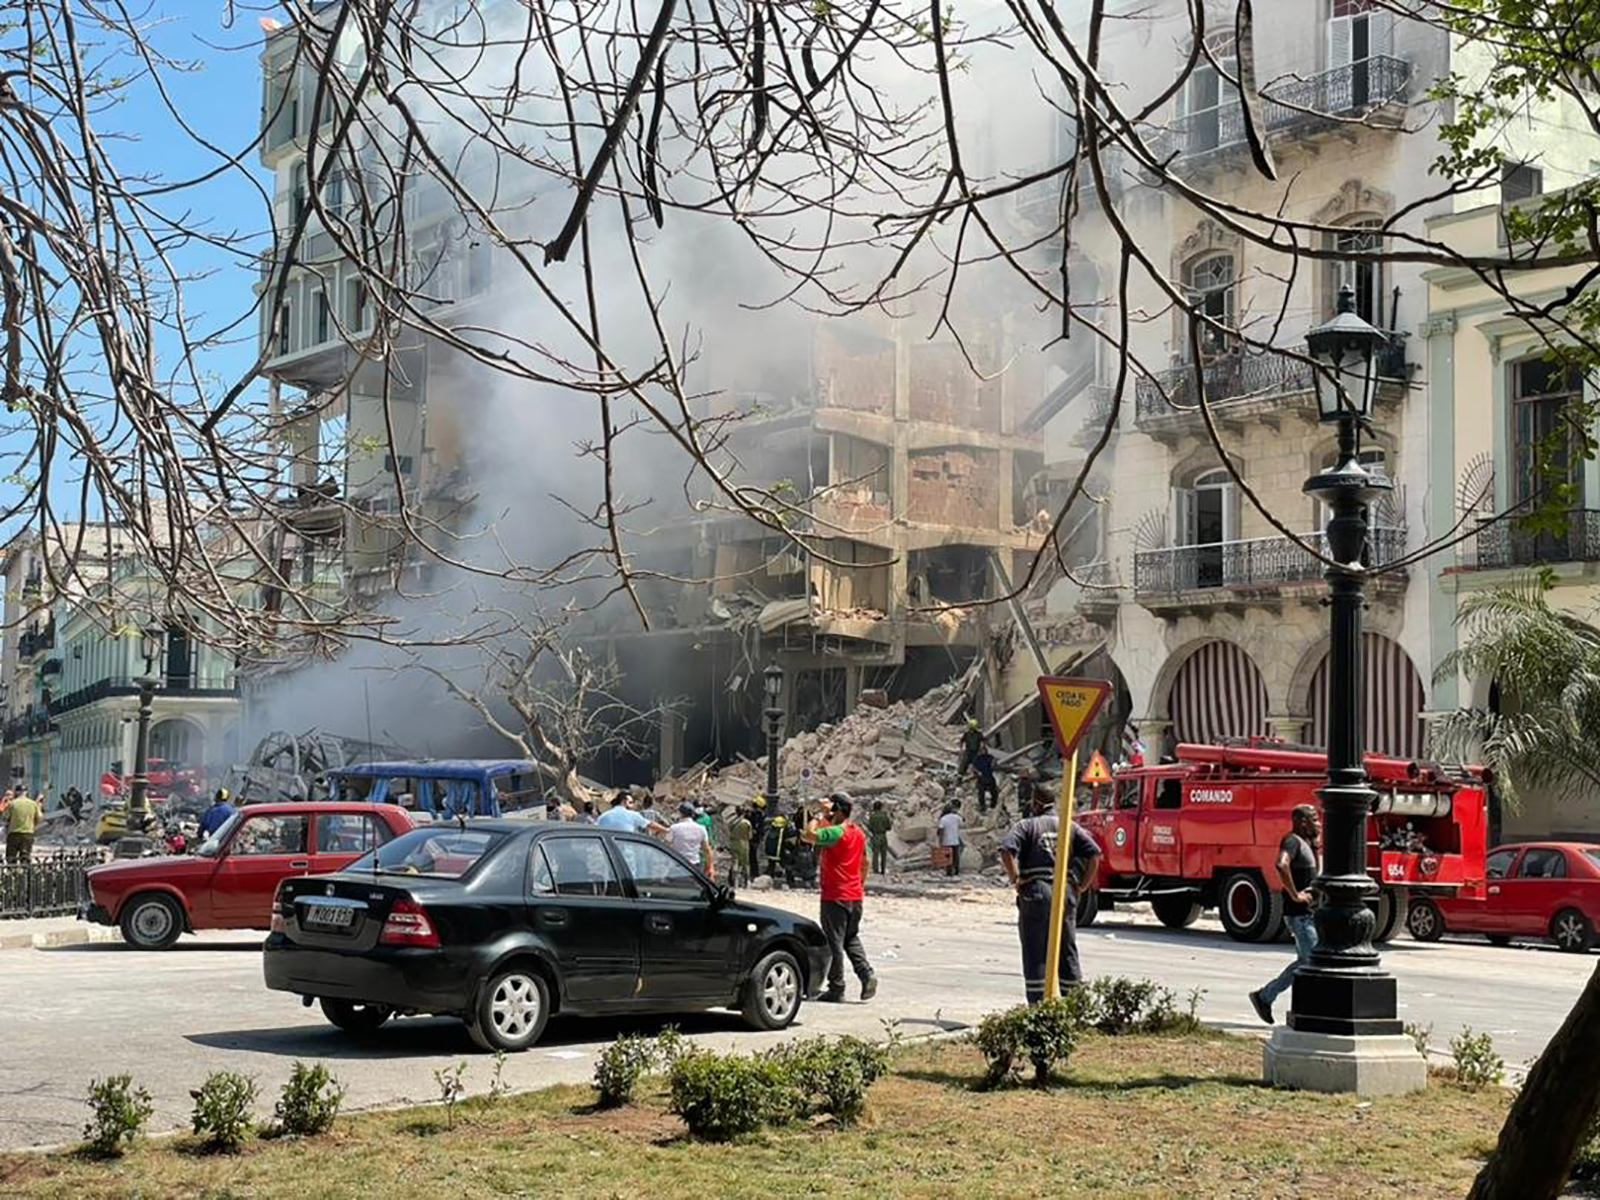 Rescuers Searching For Survivors After Massive Explosion Destroys Hotel In Havana, Cuba